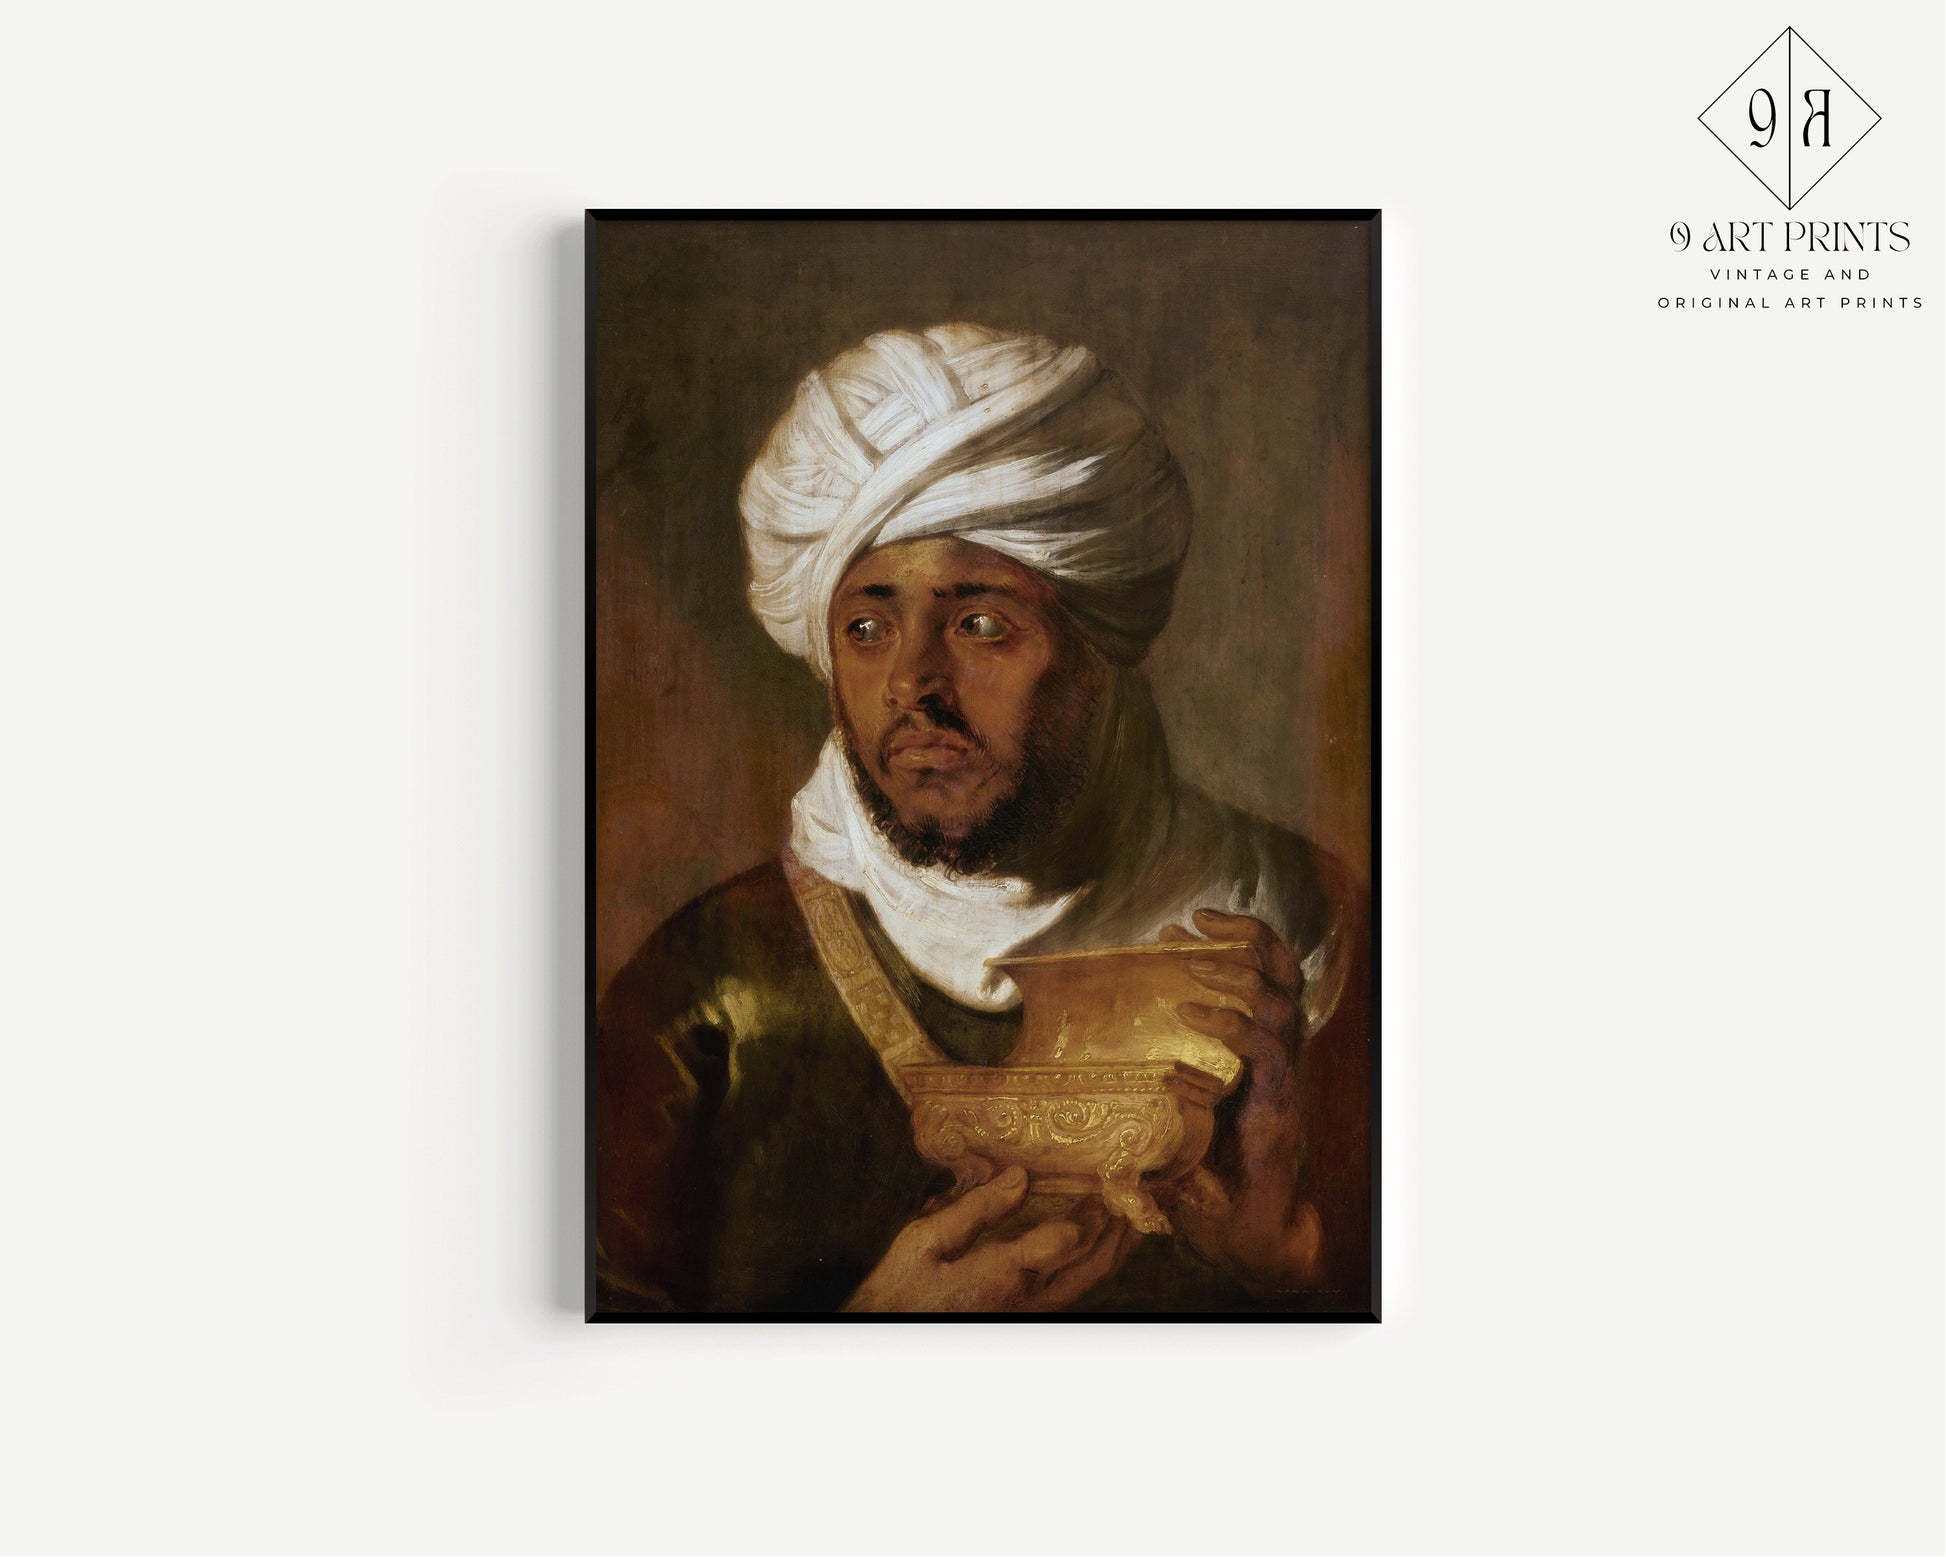 Rubens The Moorish King Fine Art Famous Iconic Painting Vintage Ready to hang Framed Home Office Decor Print Gift Idea